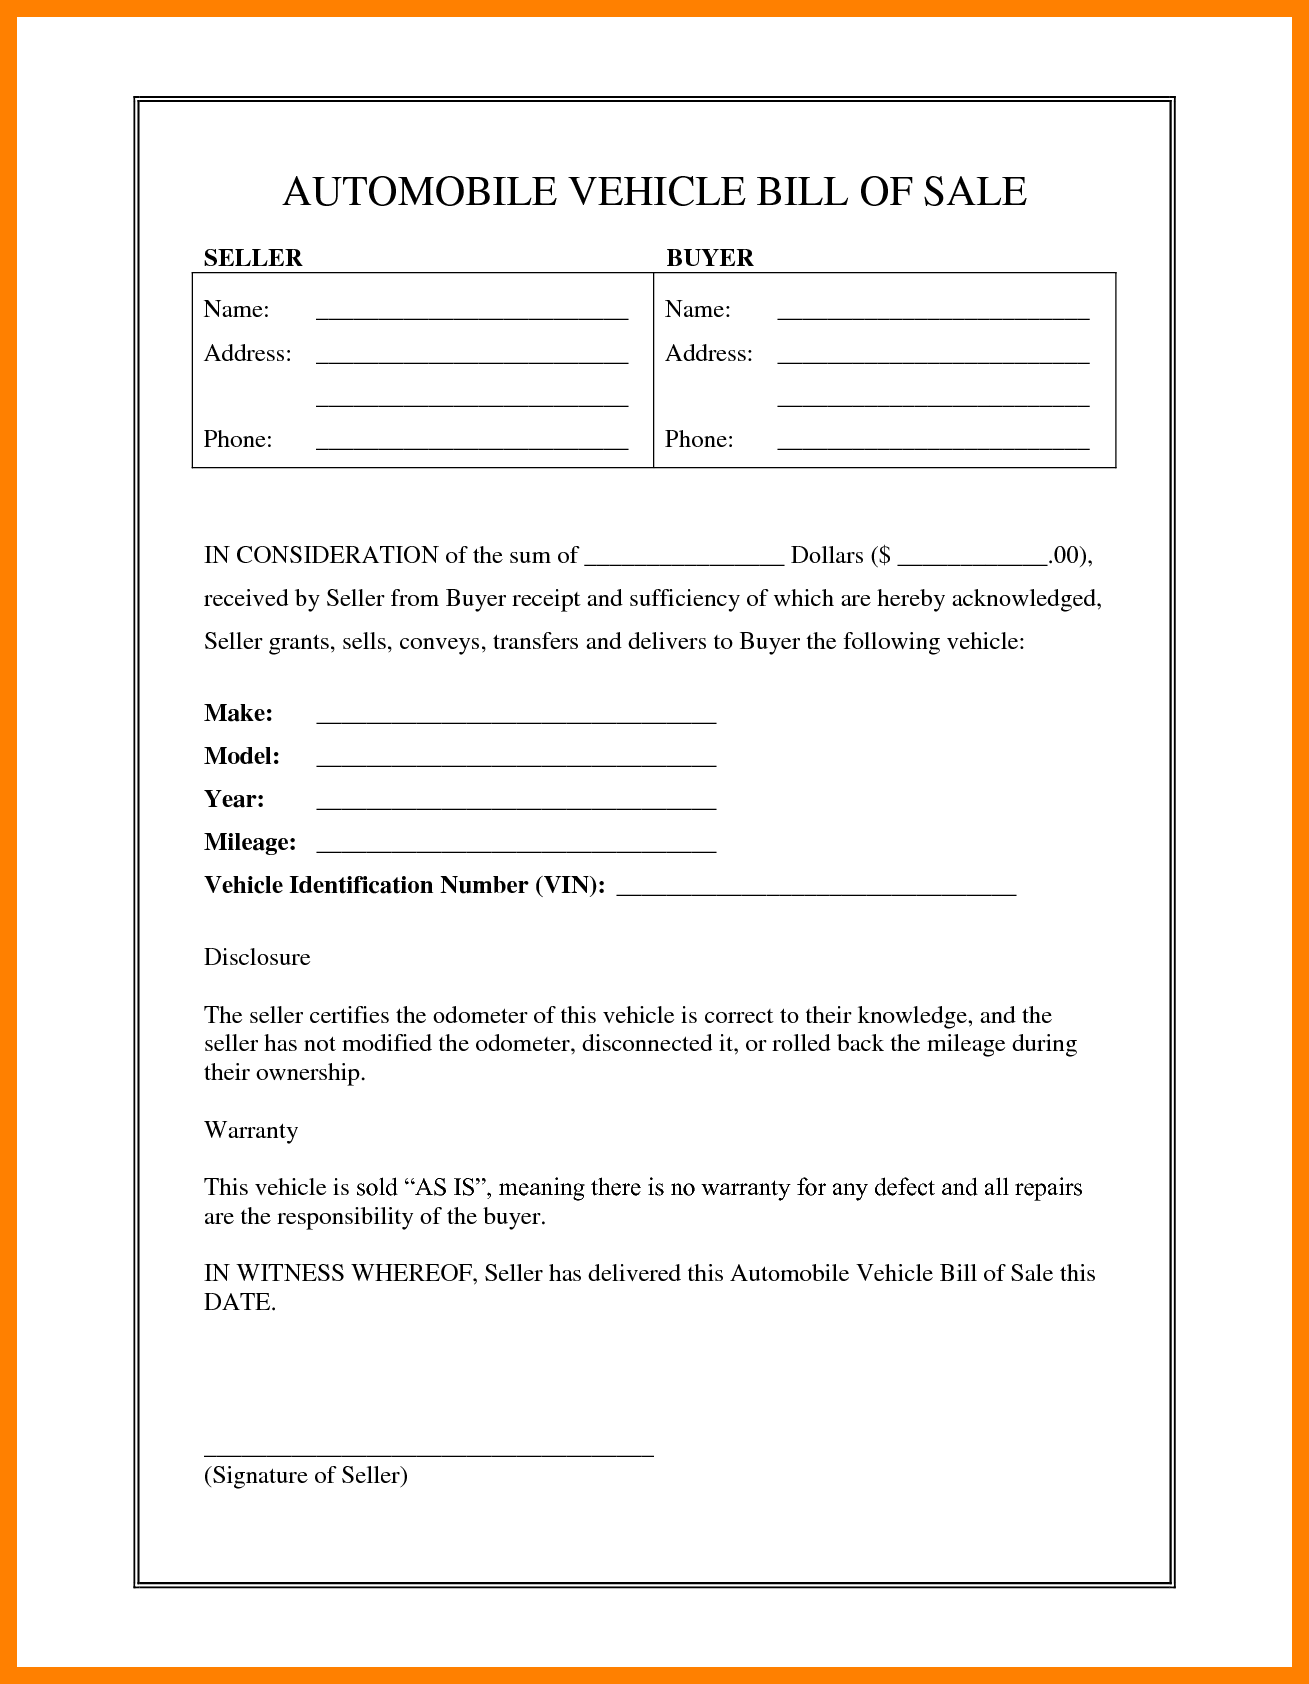 Free As Is No Warranty Form Fillable   Fill Online, Printable 